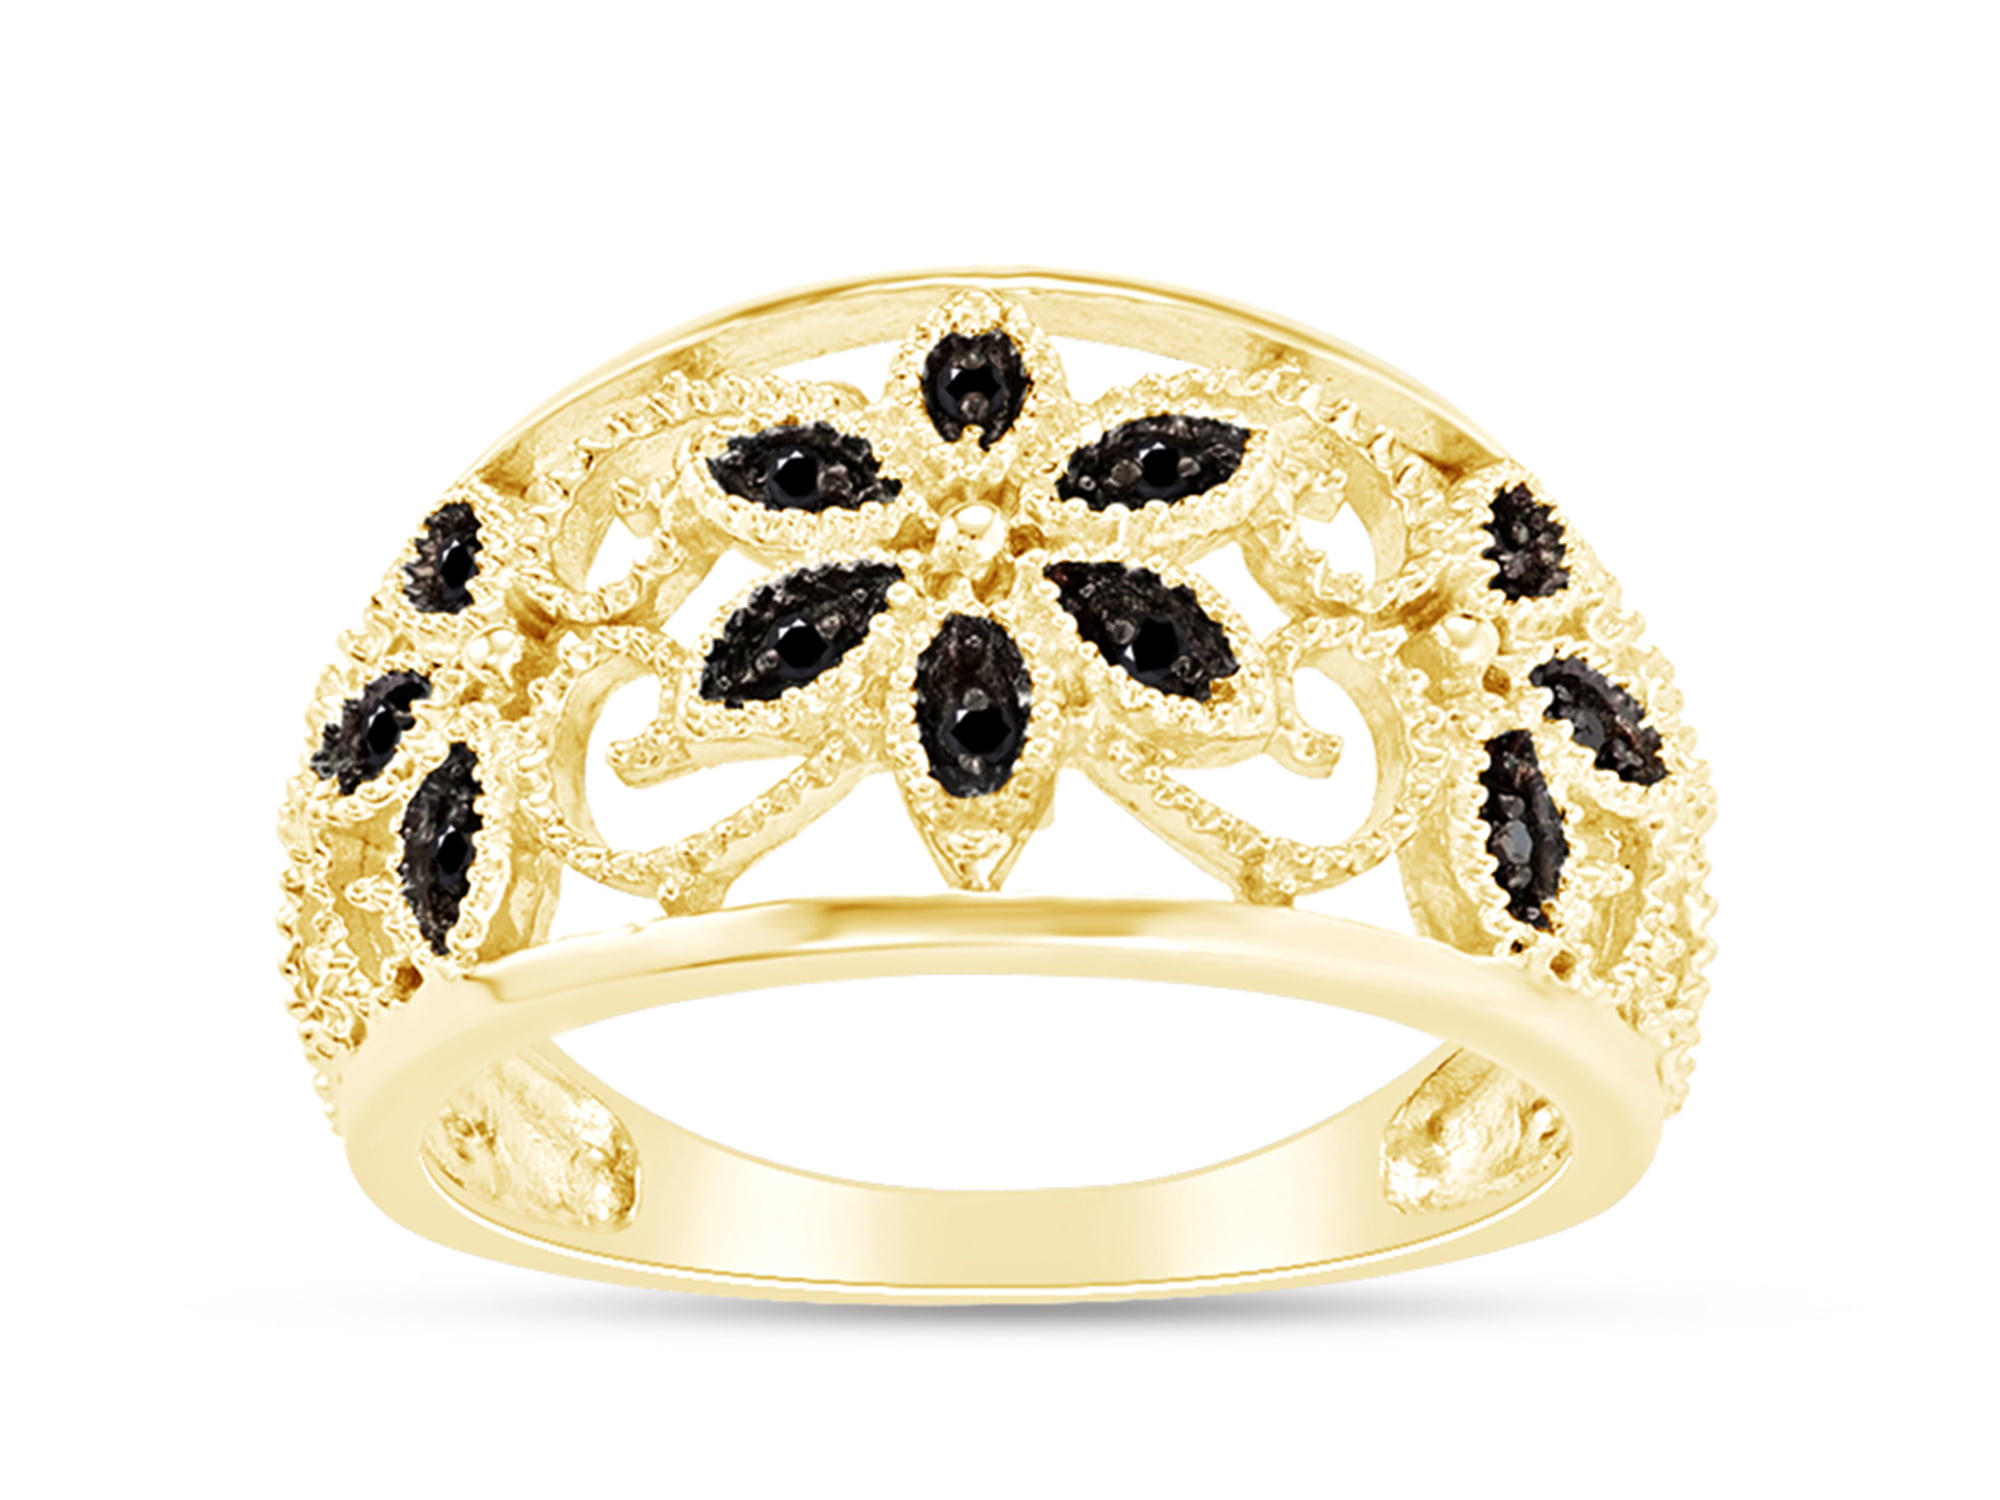 0.10 cttw 14K Gold Over Sterling Silver Round Black Diamond Wedding Anniversary Stackable Band